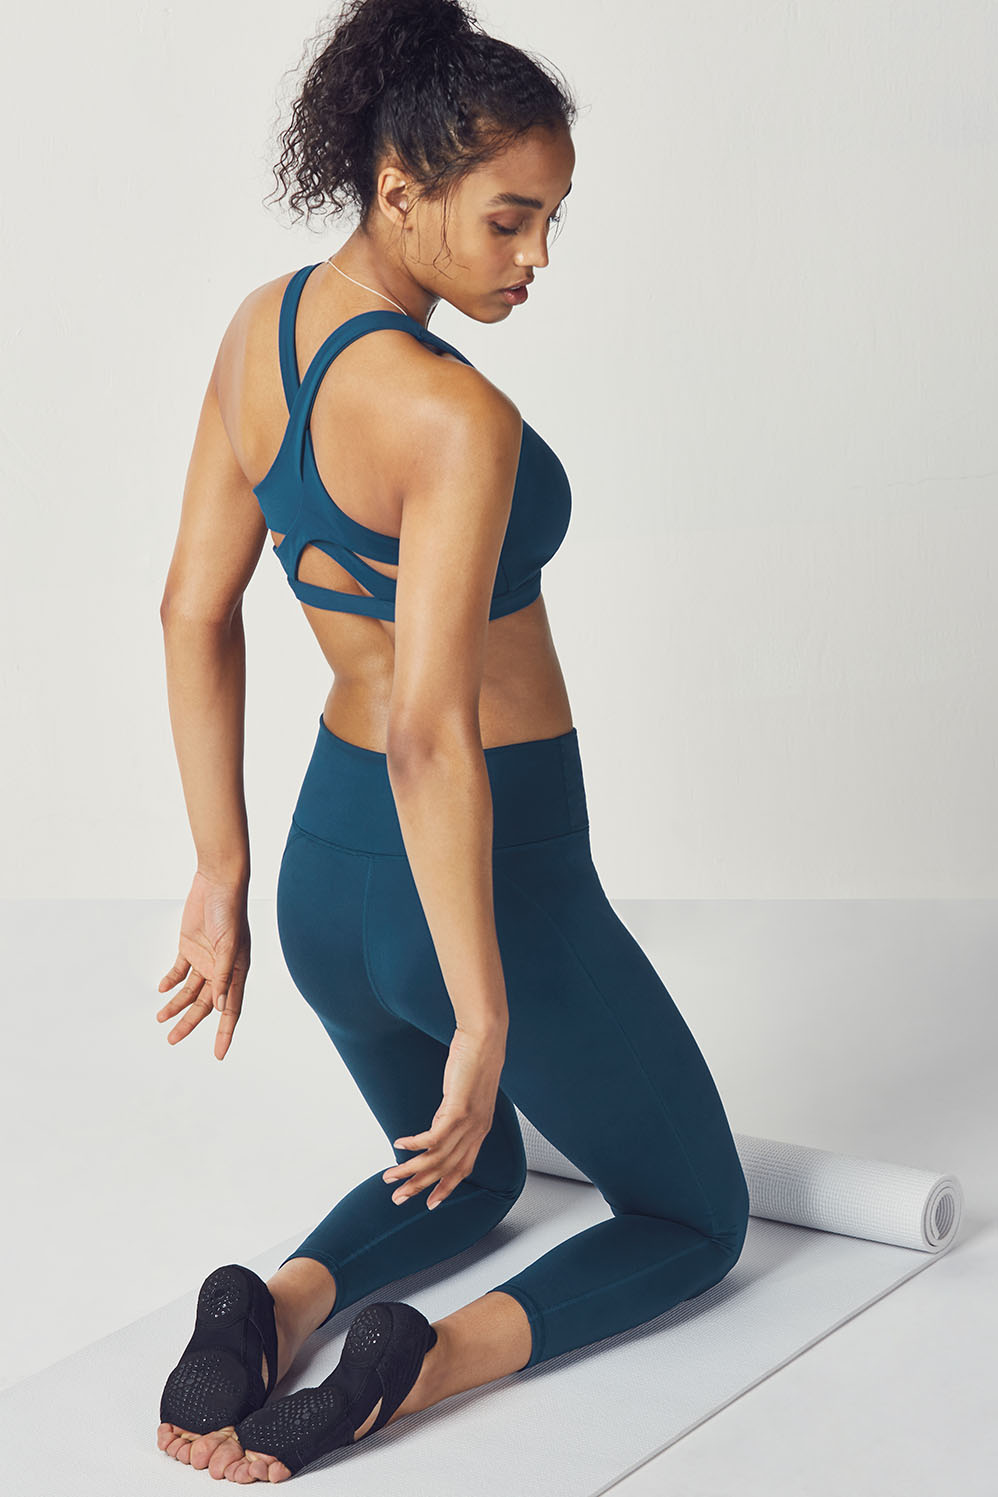 8 Ways to Escape Gym-timidation - The Fabletics Blog